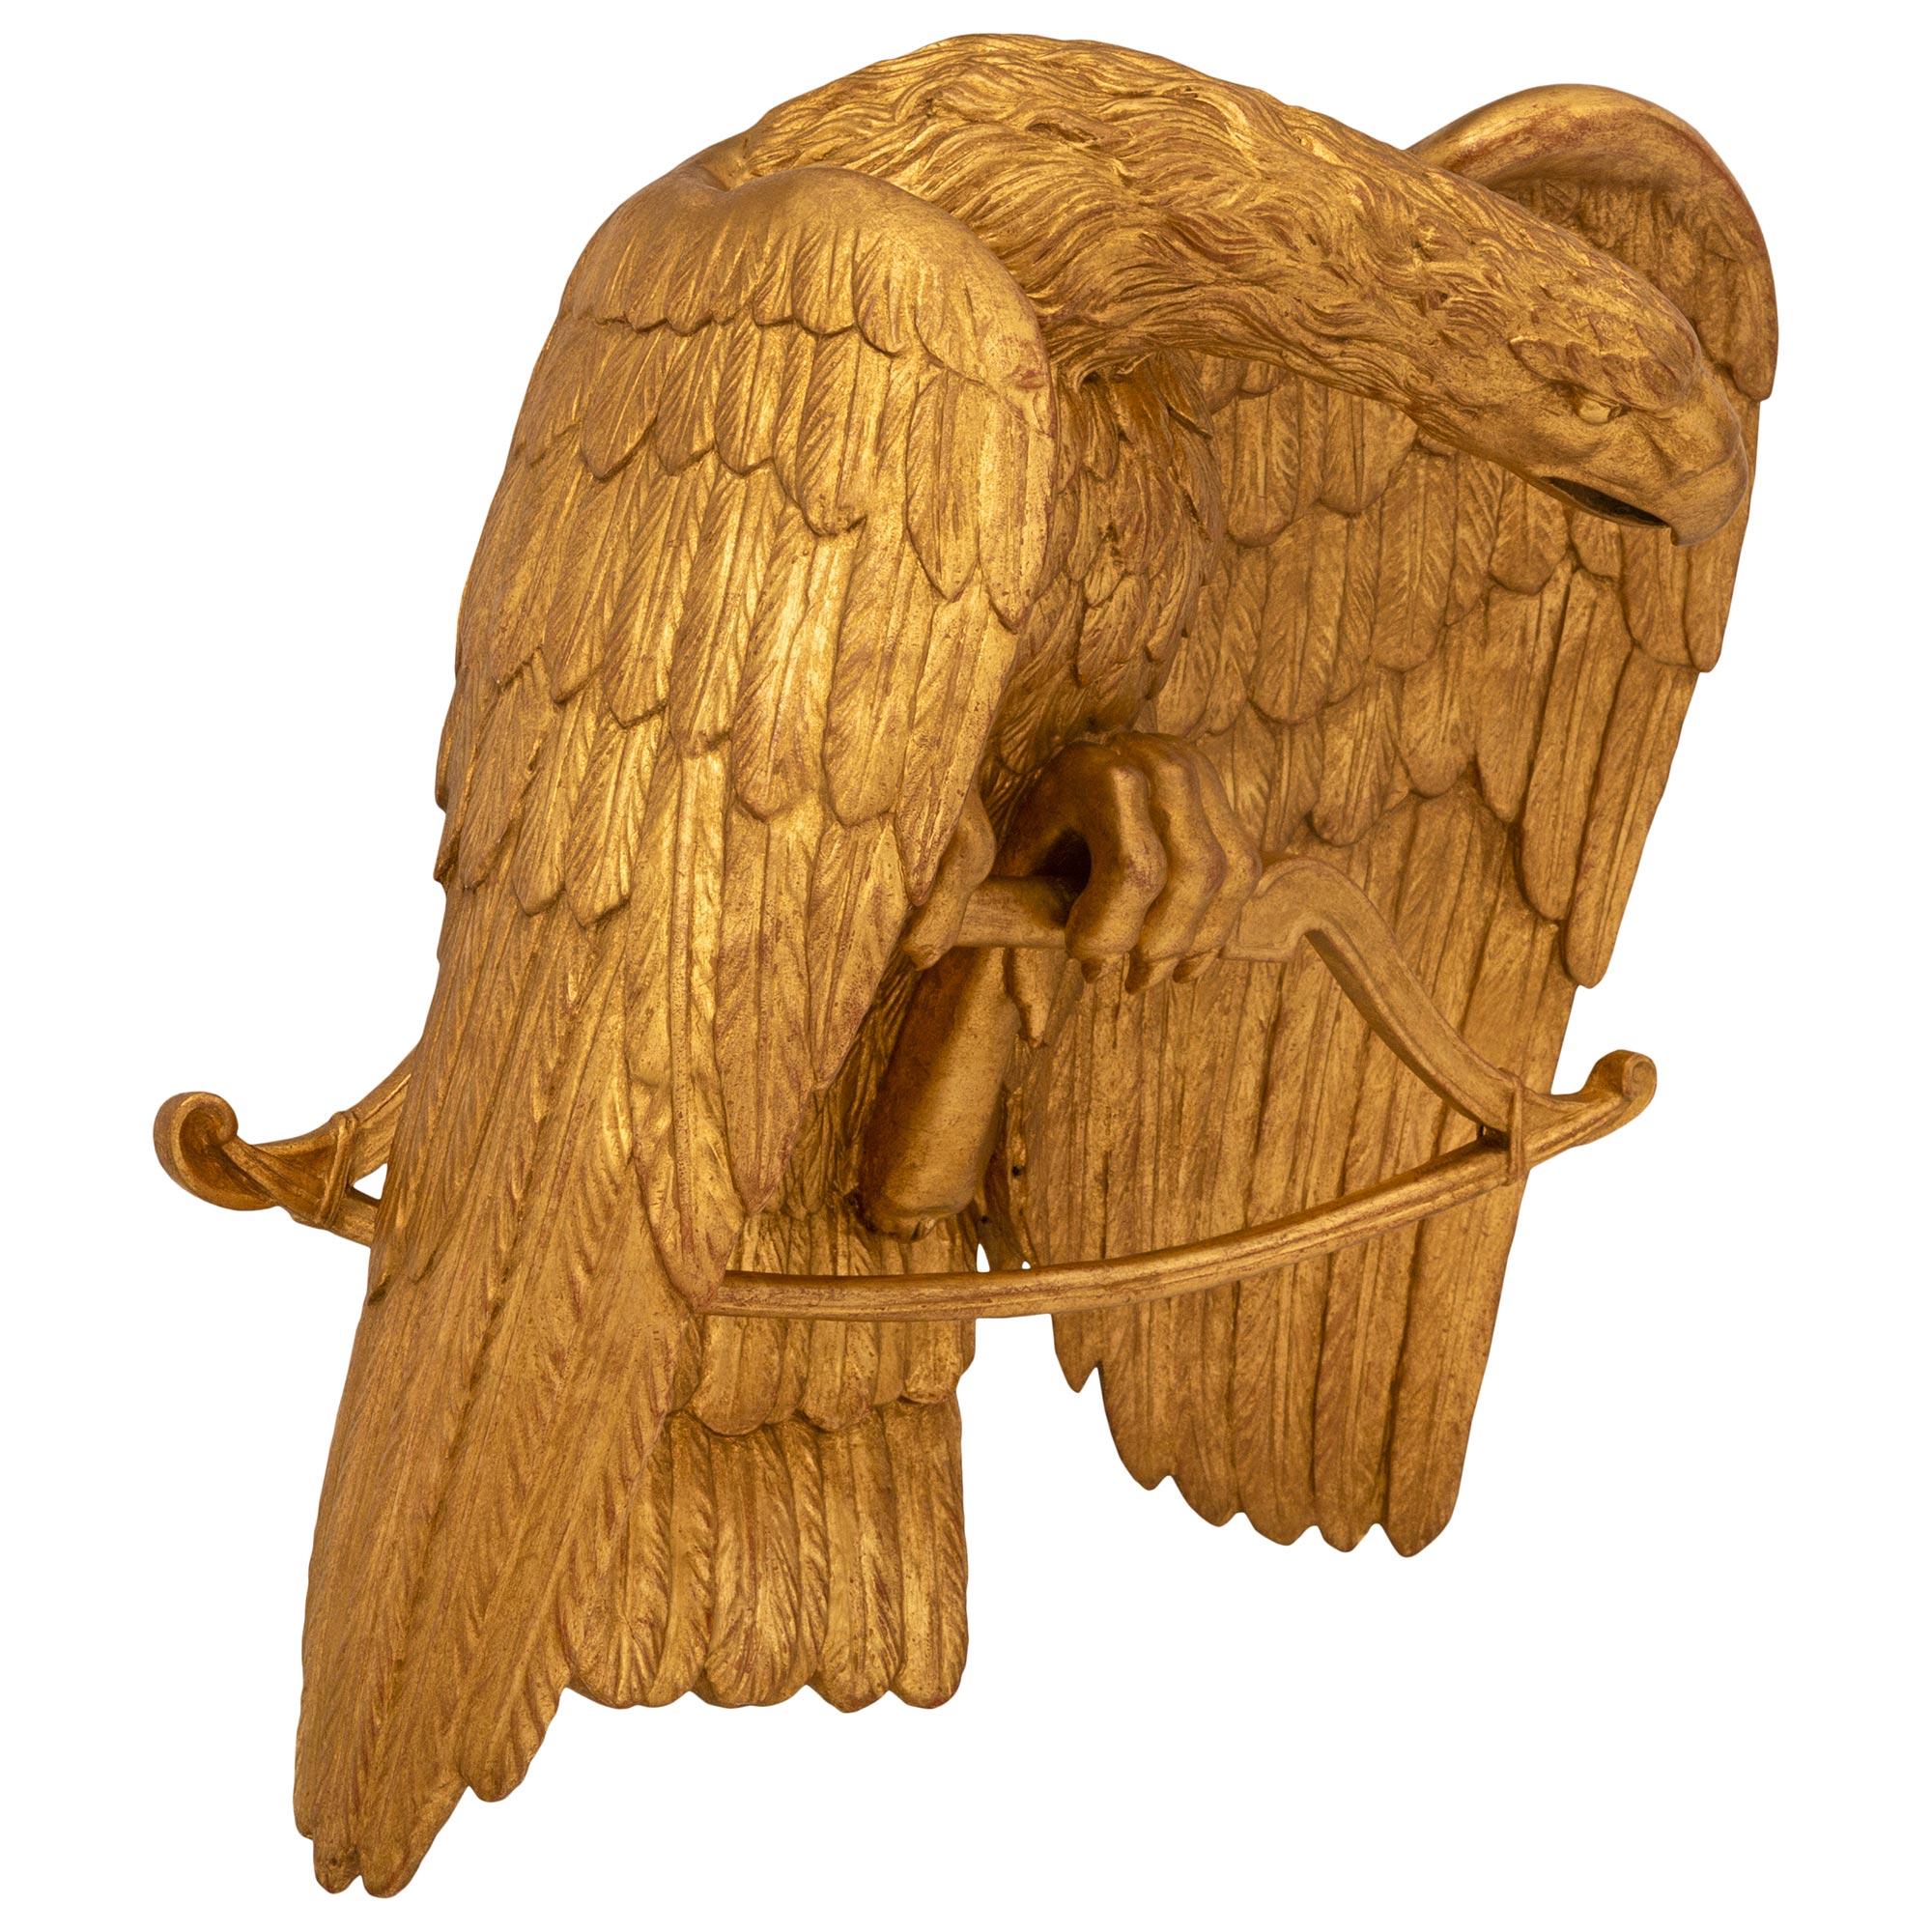 Italian Early 19th Century 1st Empire Period Giltwood Eagle Wall Decor In Good Condition For Sale In West Palm Beach, FL